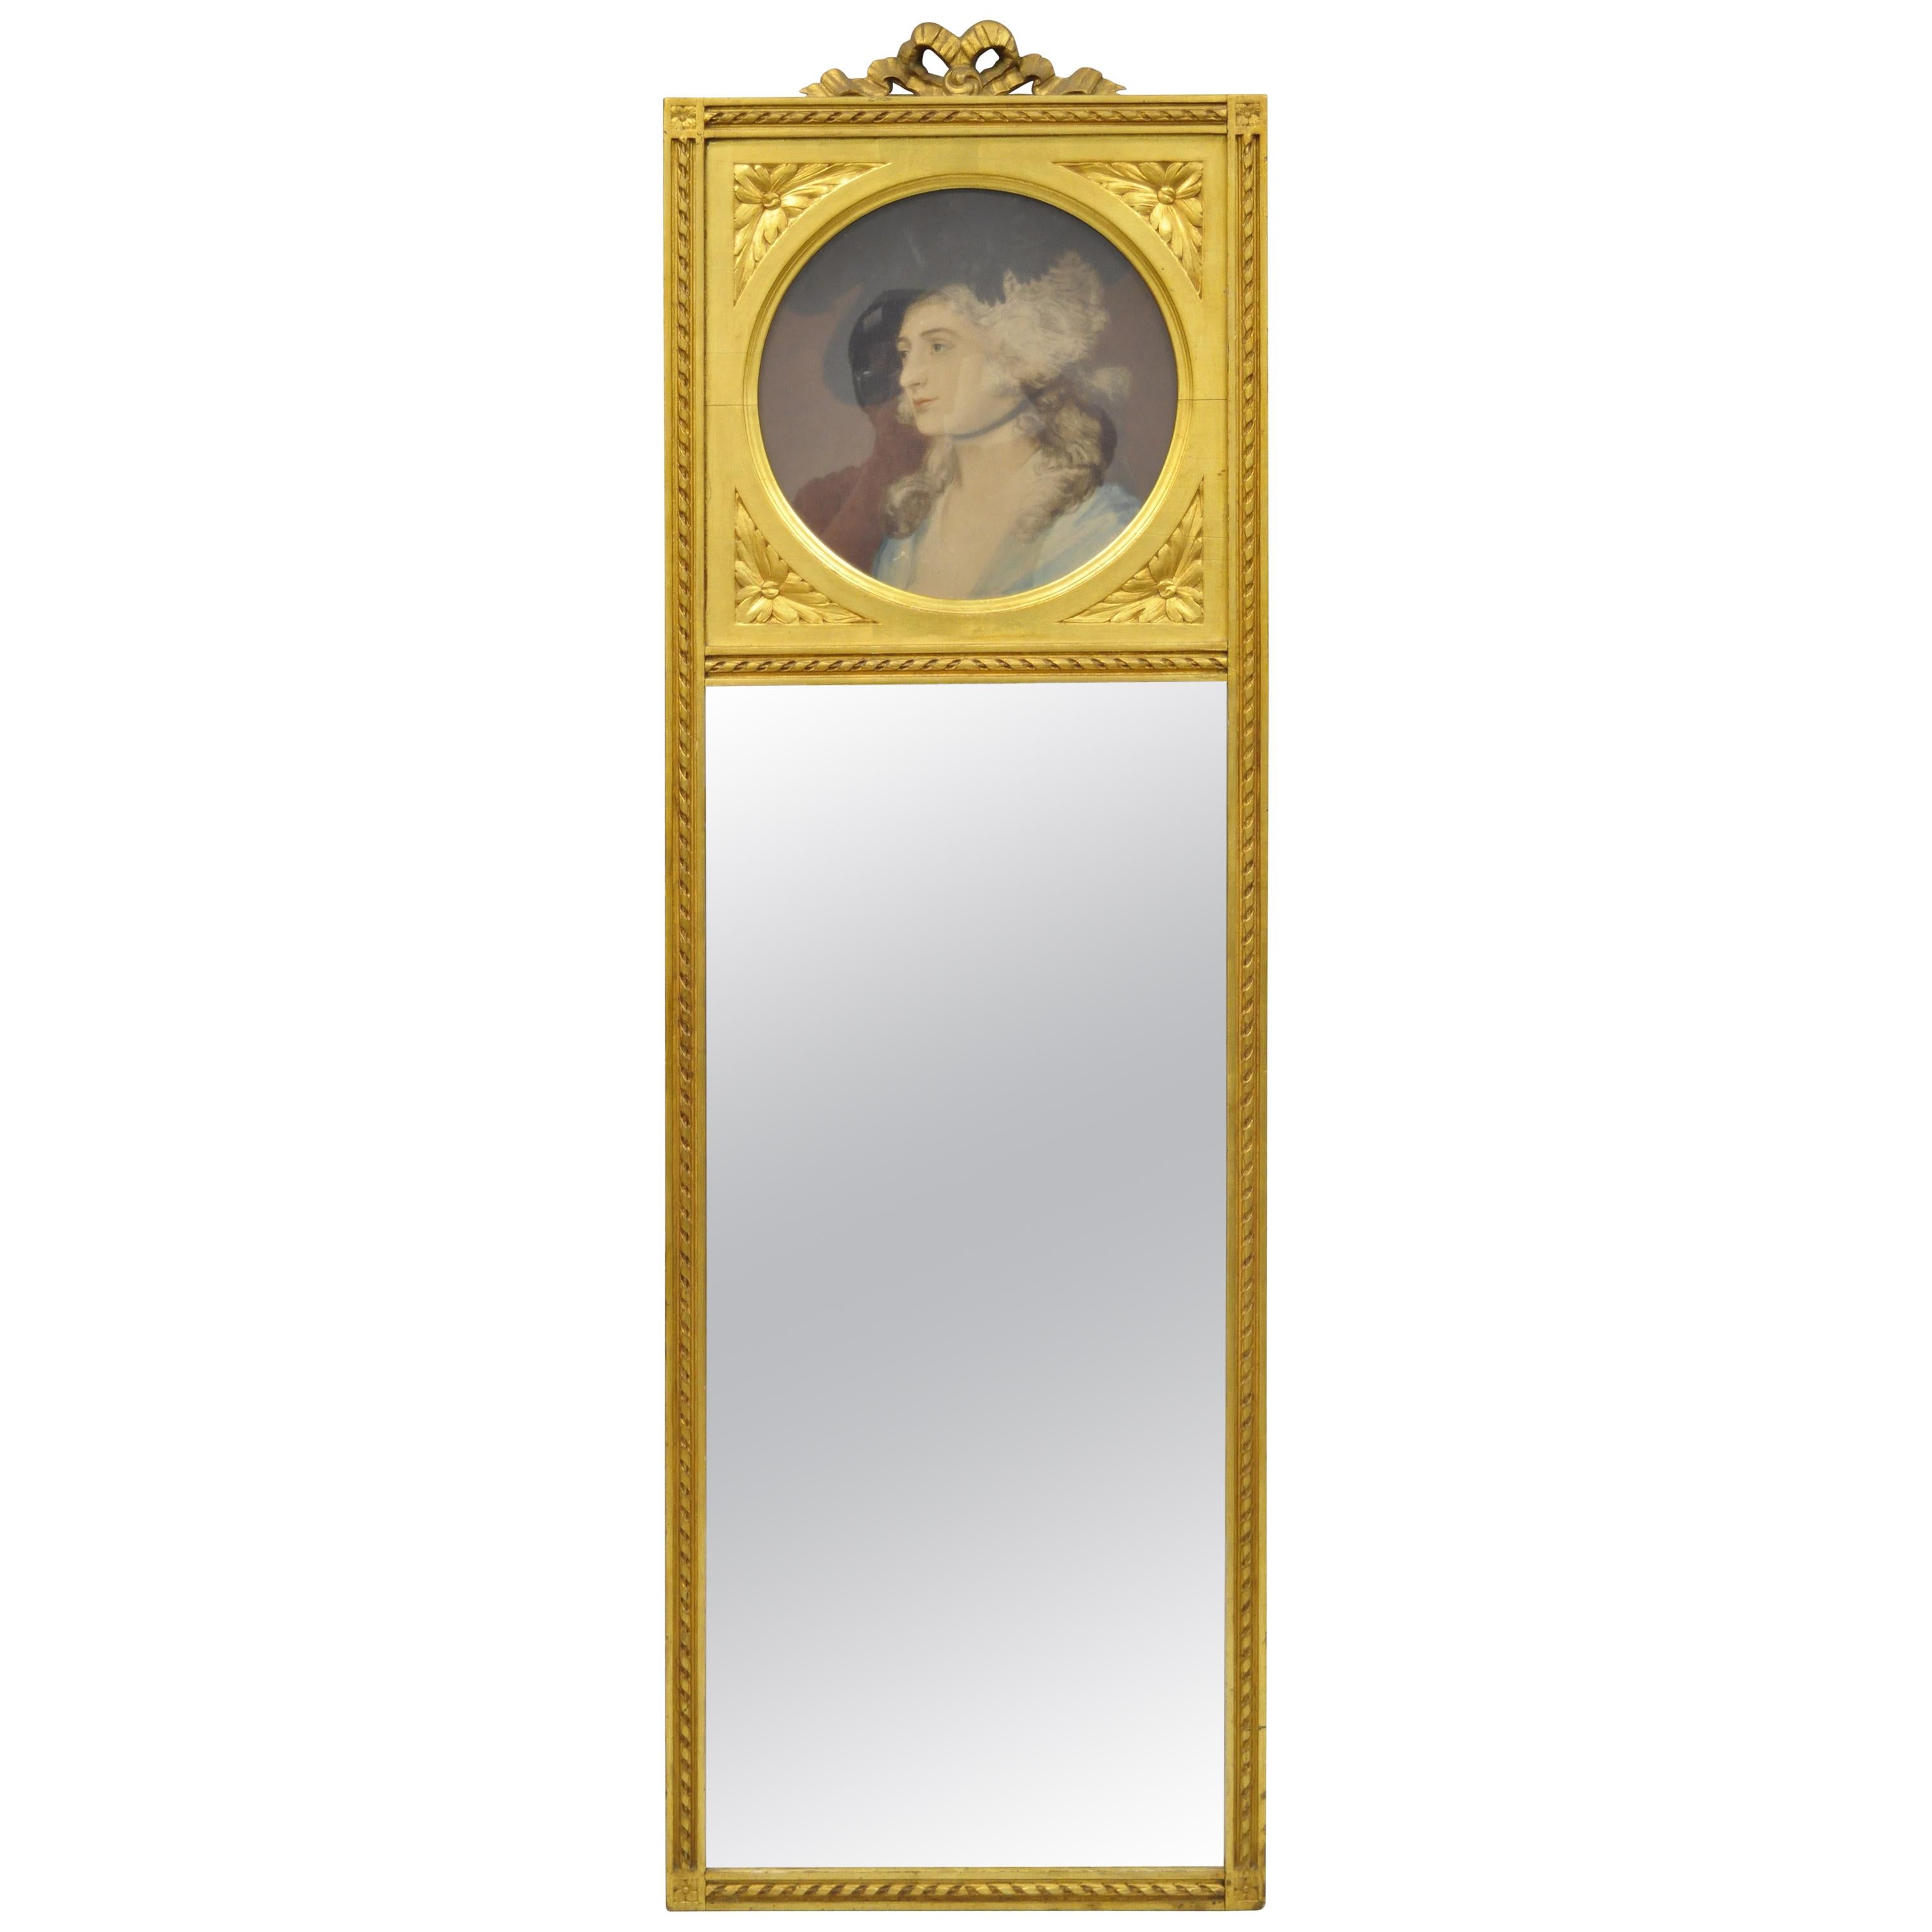 Antique French Louis XV Style Gold Gilt Wood Trumeau Mirror with Portrait Print